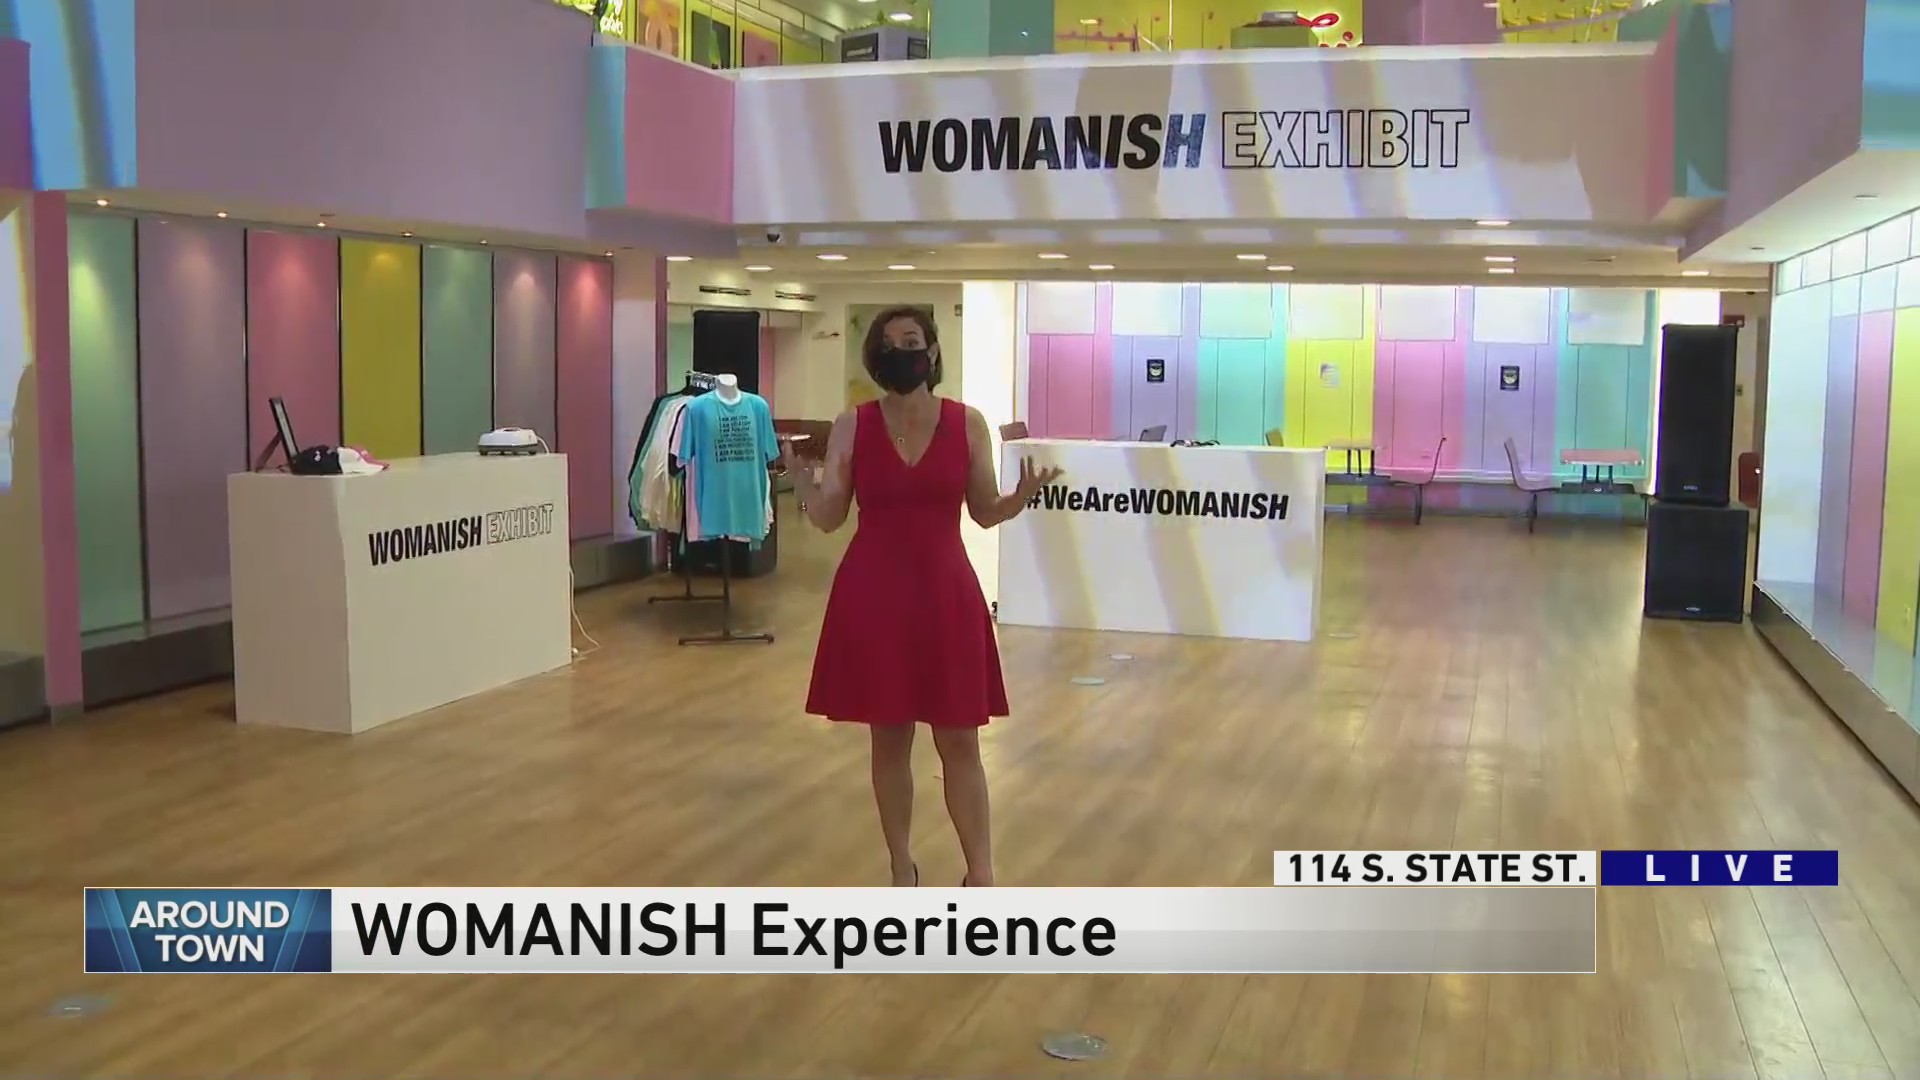 Around Town visits the WOMANISH Experience